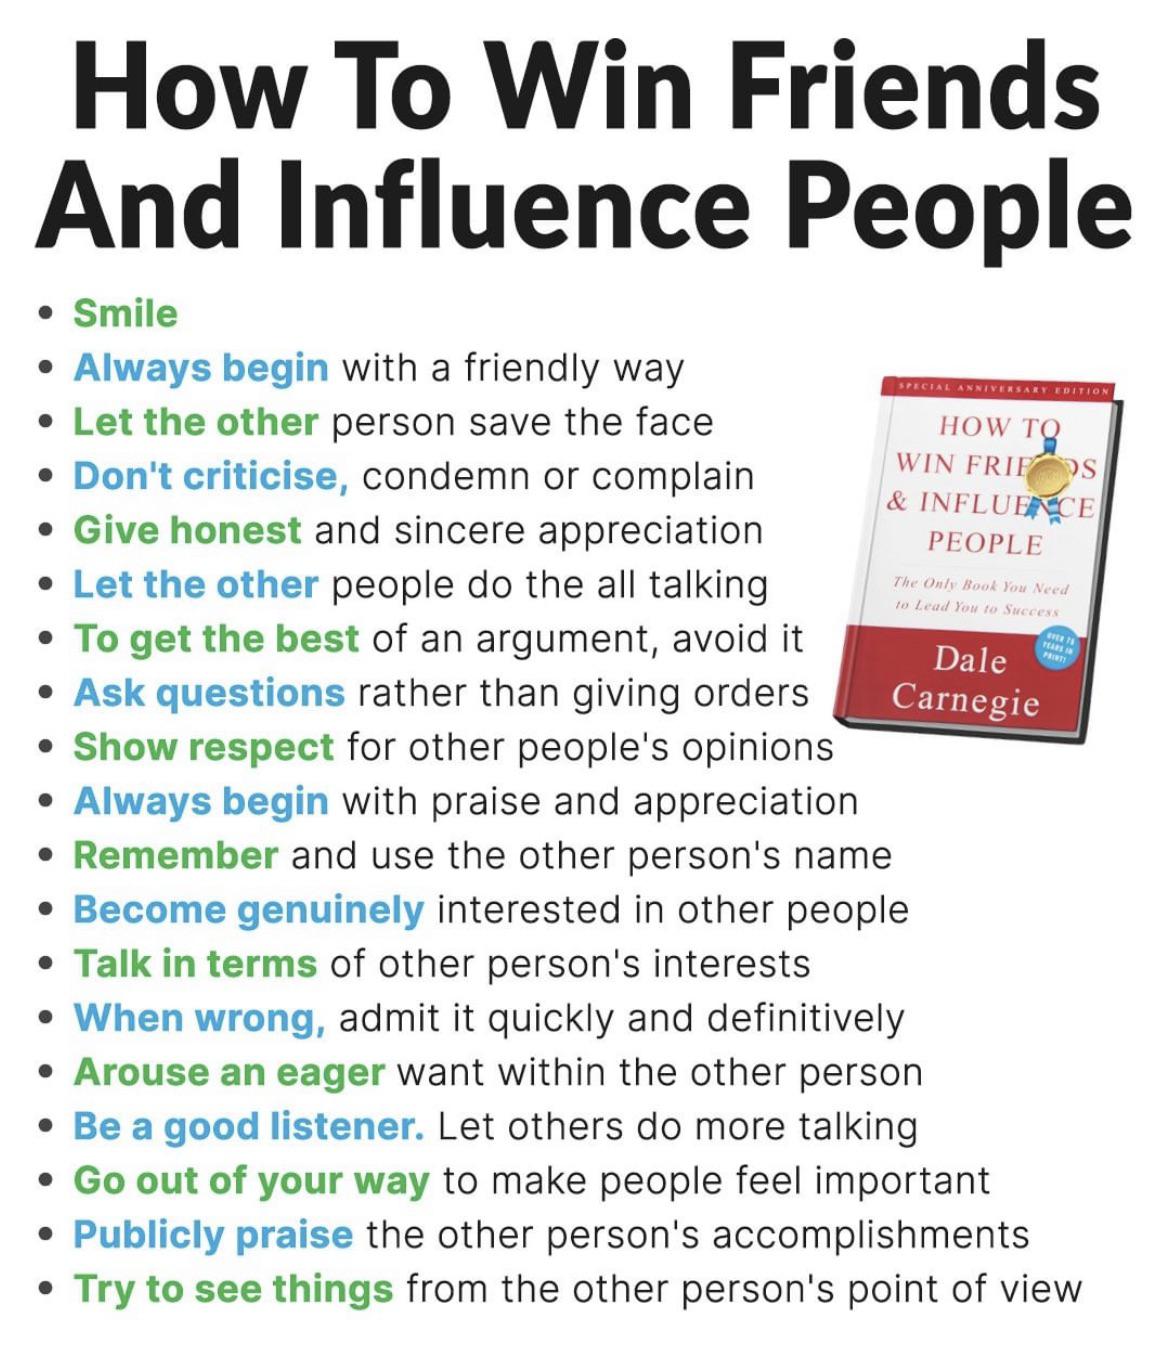 paper - How To Win Friends And Influence People Special Anniversary Edition The Only Book You Need to lead you to Success Gre Dale Carnegie Smile Always begin with a friendly way Let the other person save the face How To Win Fritos Don't criticise, condem